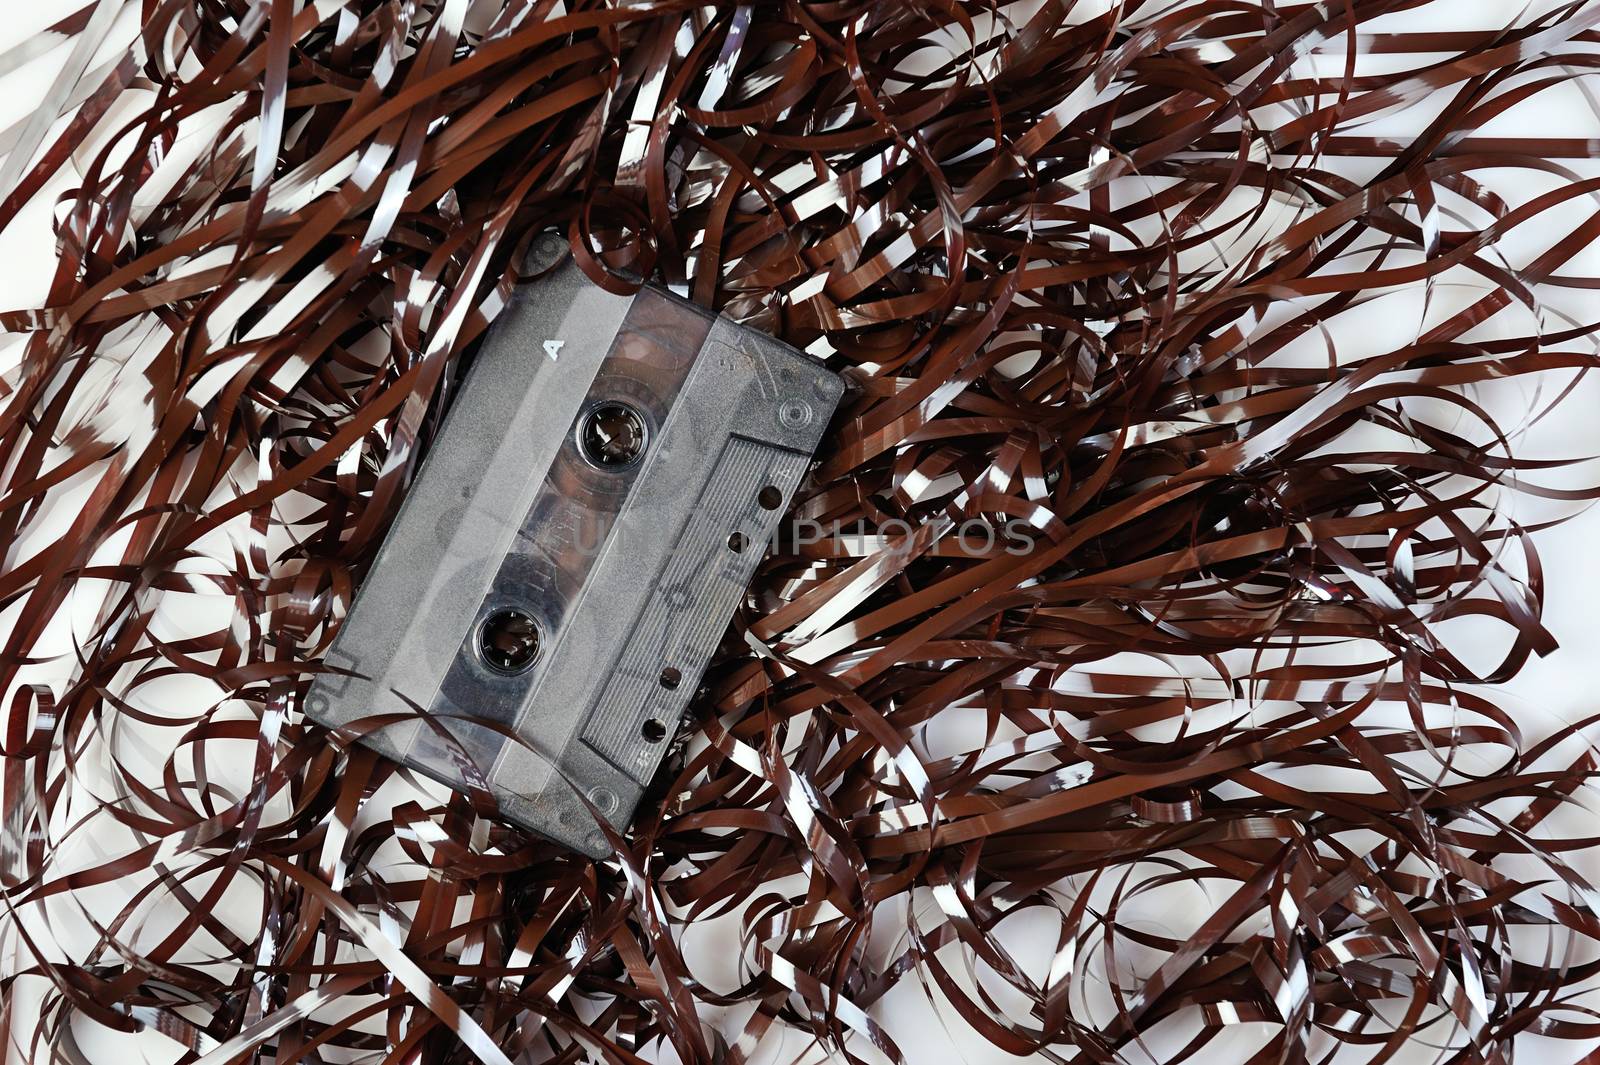 Audio casette on top of tape on a white background